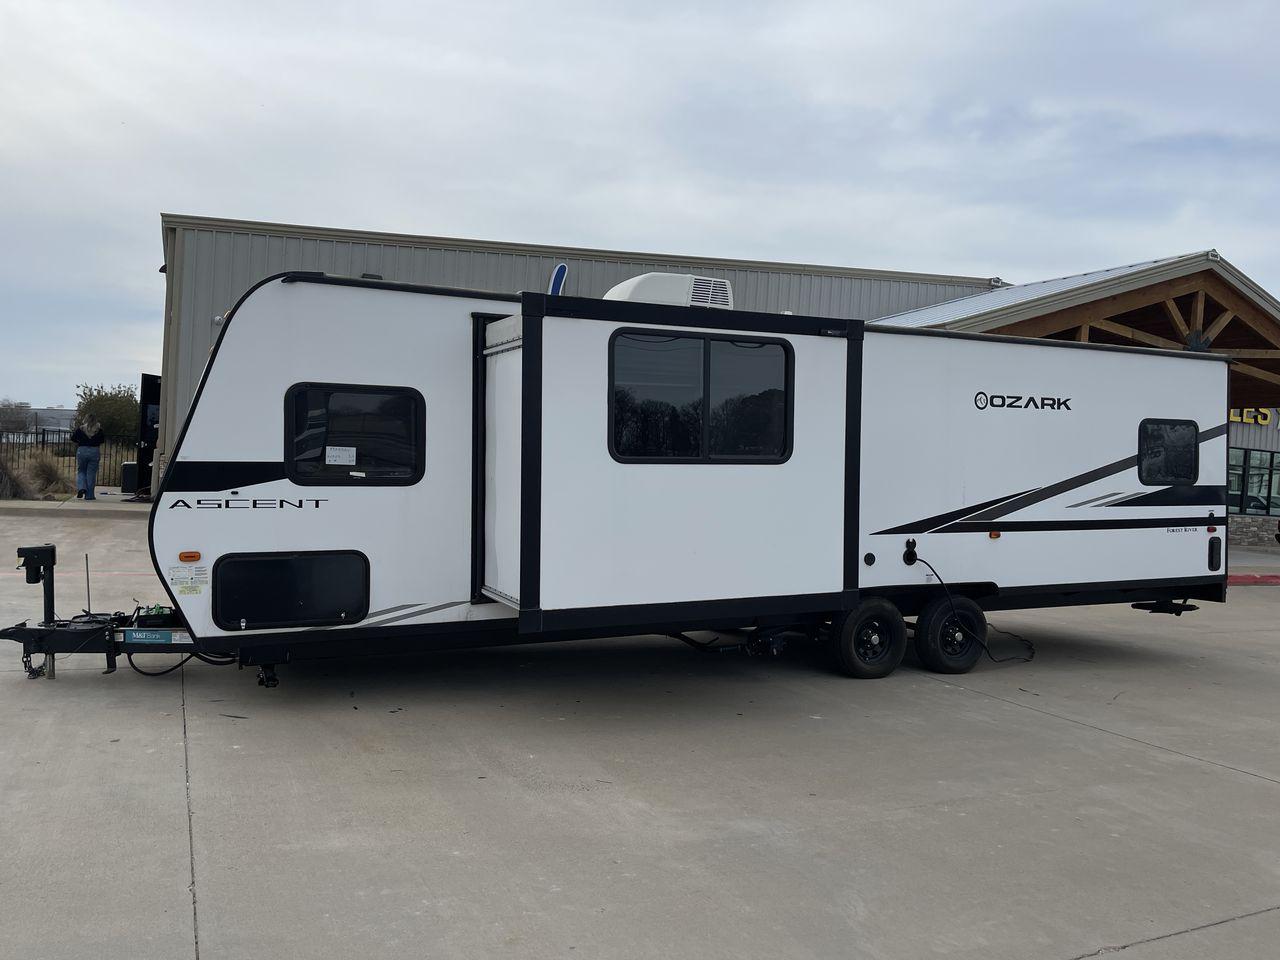 2021 FOREST RIVER OZARK 2700THX (5ZT2ZKSB7MG) , Length: 32.33 ft. | Dry Weight: 5,683 lbs. | Gross Weight: 7,830 lbs. | Slides: 1 transmission, located at 4319 N Main St, Cleburne, TX, 76033, (817) 678-5133, 32.385960, -97.391212 - Measuring ~32 feet in length, this RV combines compactness with functionality, making it an ideal choice for both weekend getaways and extended road trips. The Ozark 2700THX features a features a single slide-out, providing a well-designed and spacious interior. The 2700THX boasts a dedicated garage - Photo #20